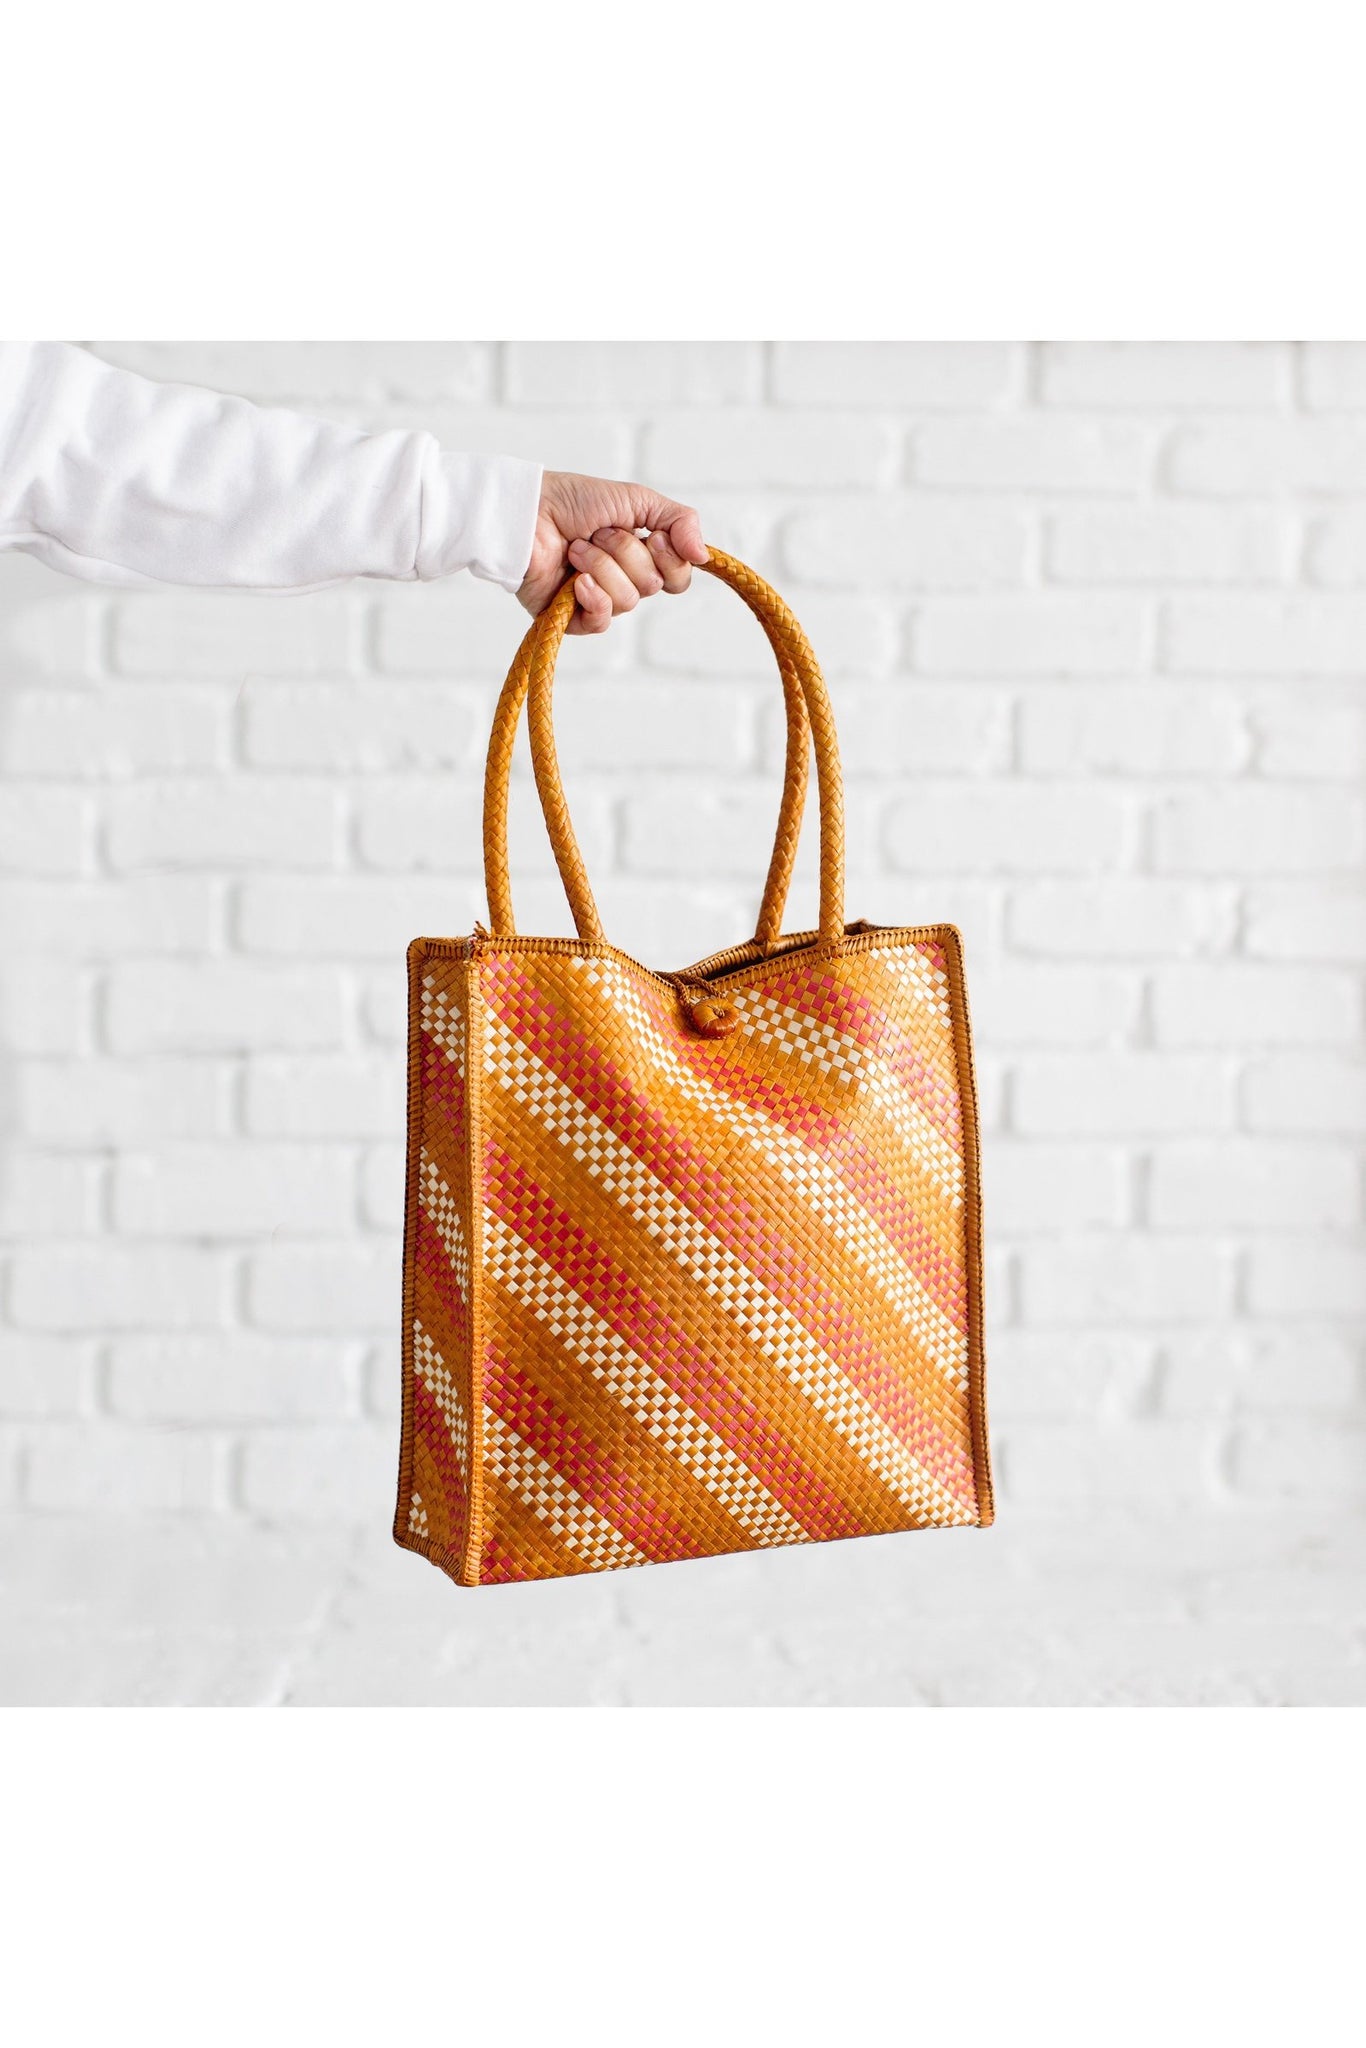 Thip Handwoven Market Tote